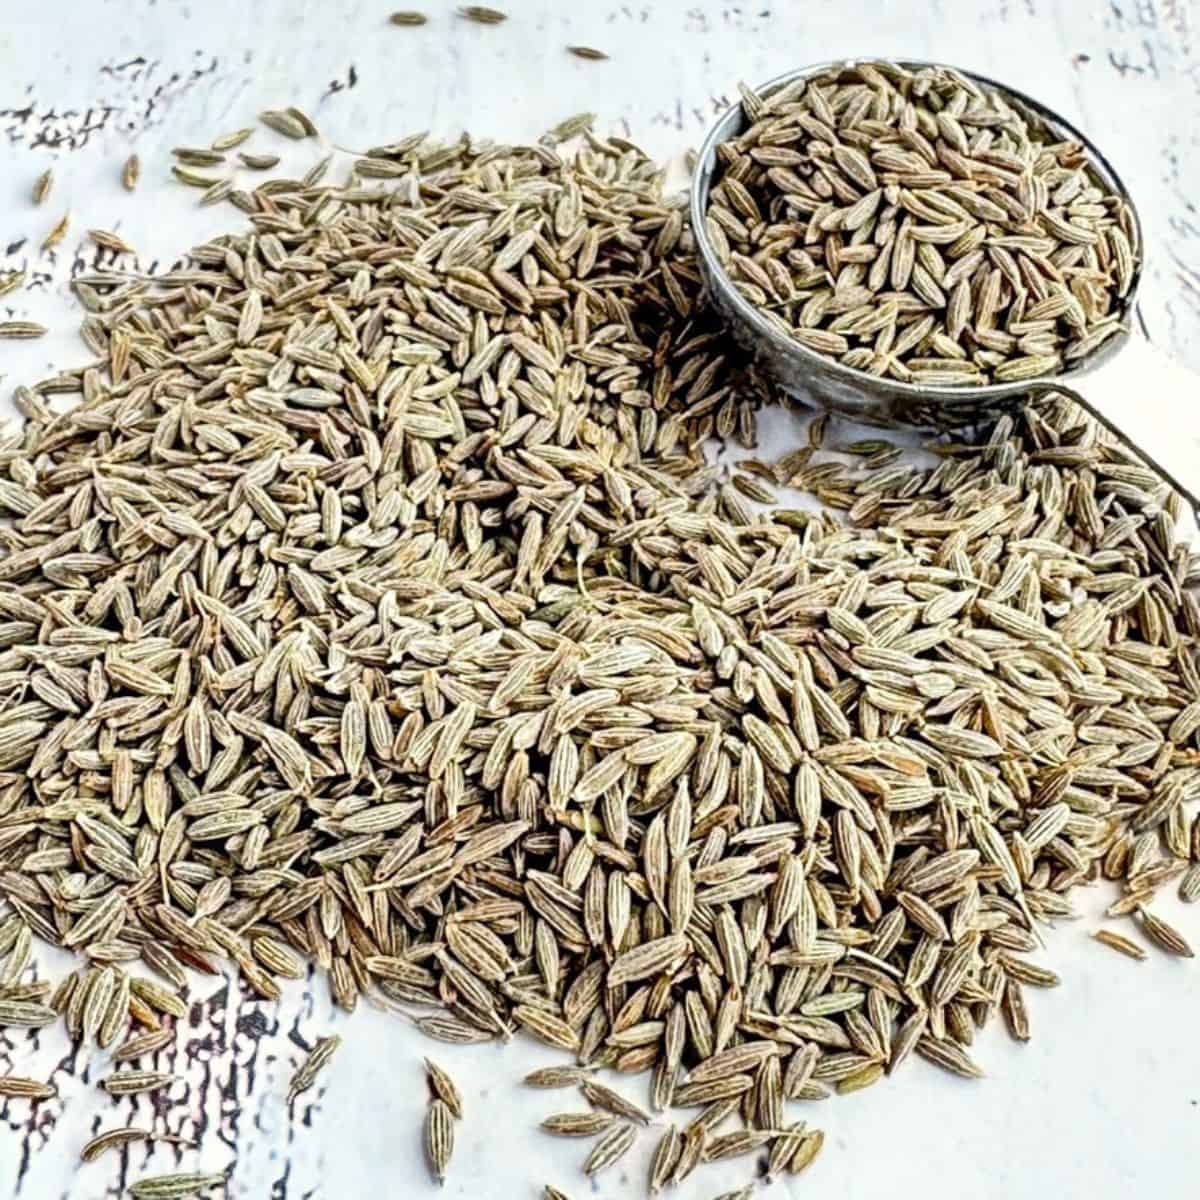 cumin seeds spread on a table with a measuring spoon filled with cumin seeds